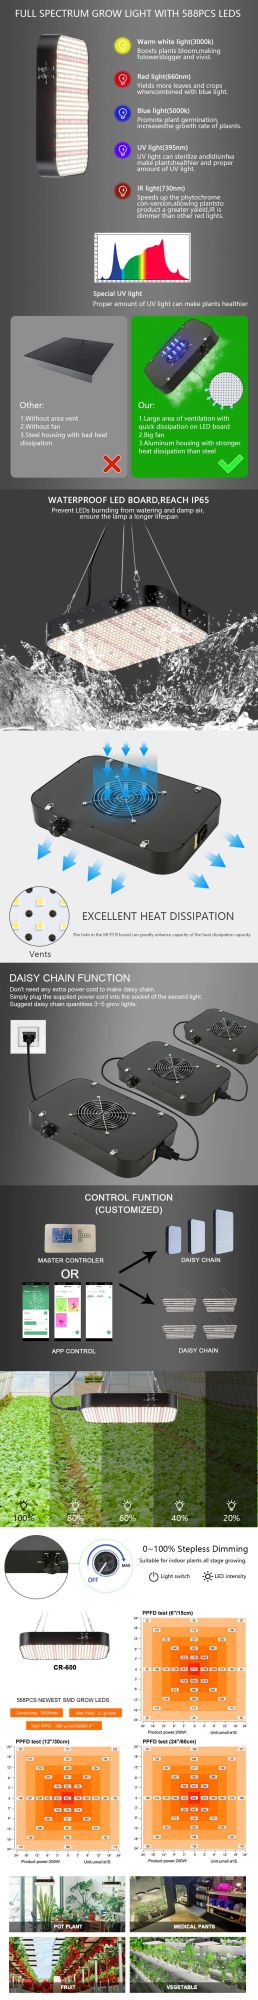 Newest Ideal Full Spectrum Plant Grow Light for 2X2 FT Coverage, Best Growing Lamps 200W with 588PCS LEDs & Daisy China Function & Strong Cool System